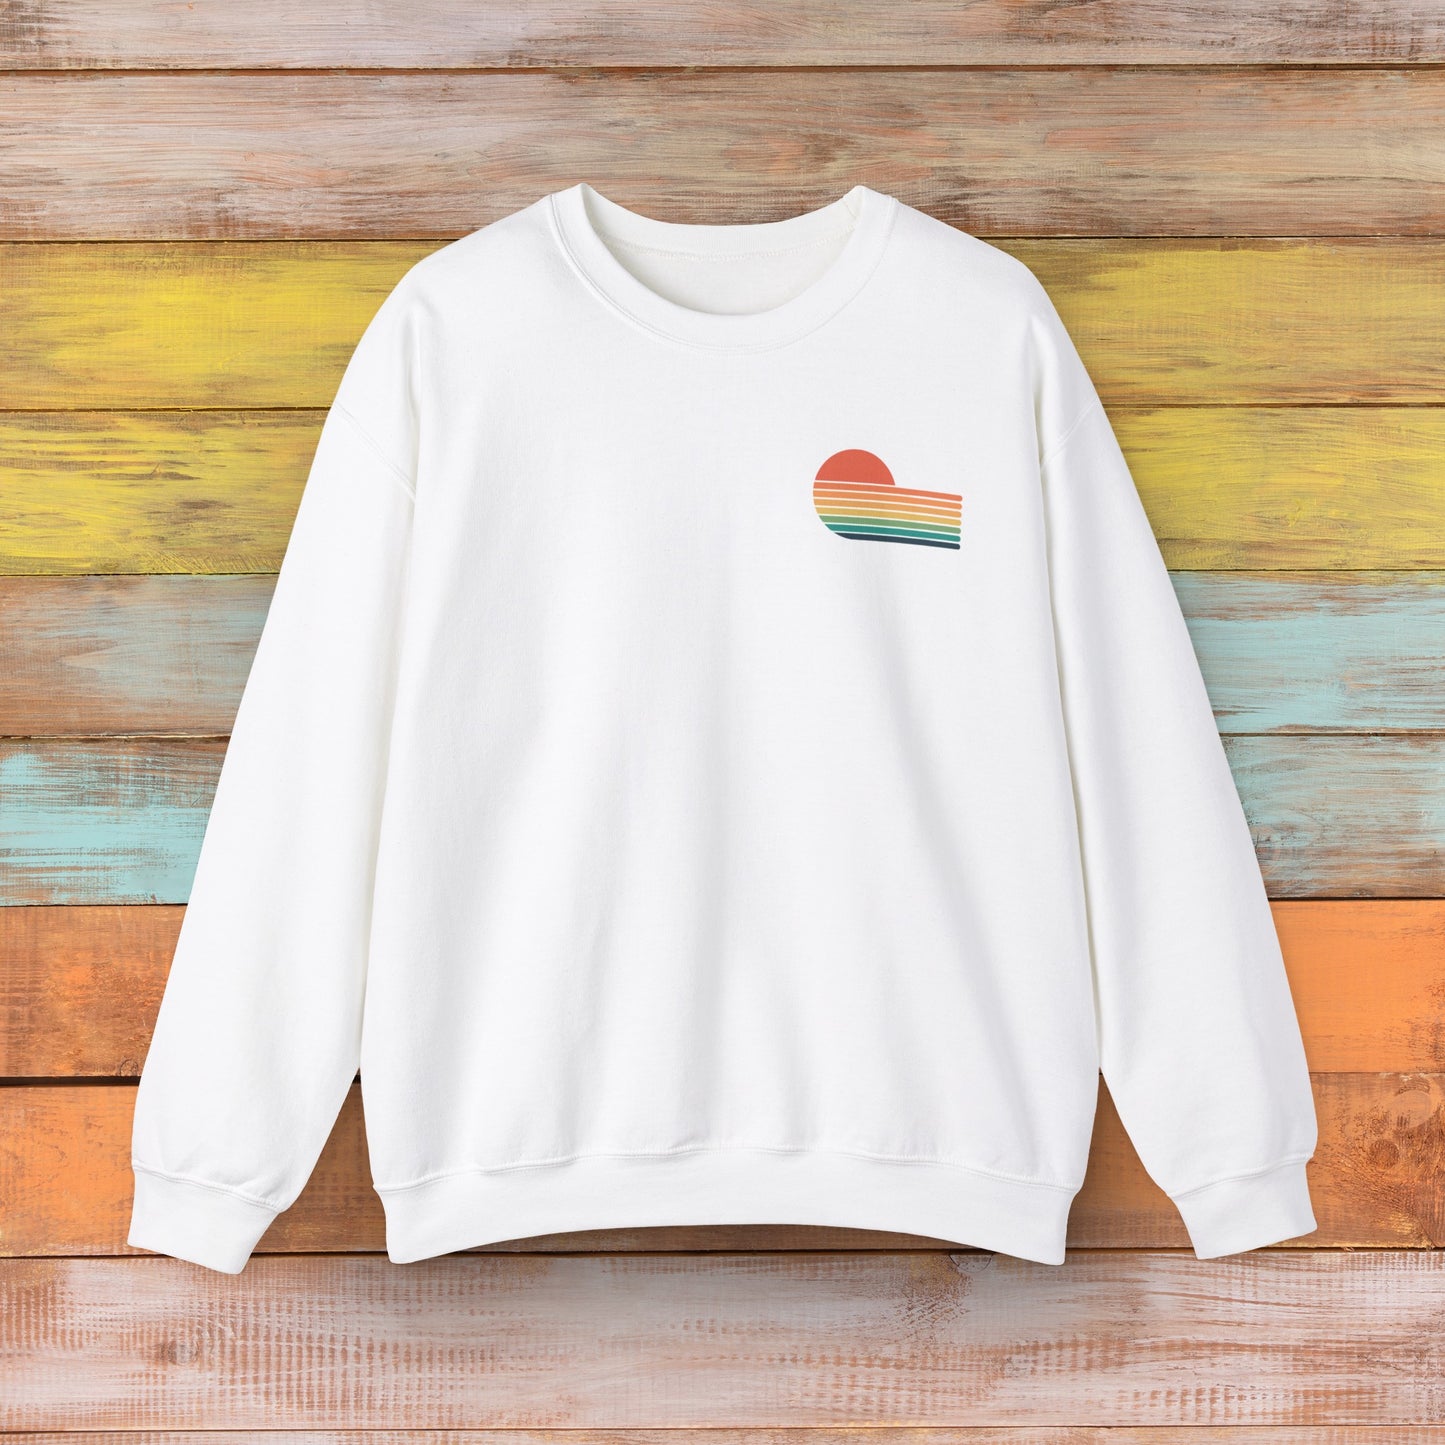 Forever Chasing Sunsets - Unisex Heavy Blend Crewneck Sweatshirt - Ethical & Durable Comfort - Perfect for Any Season